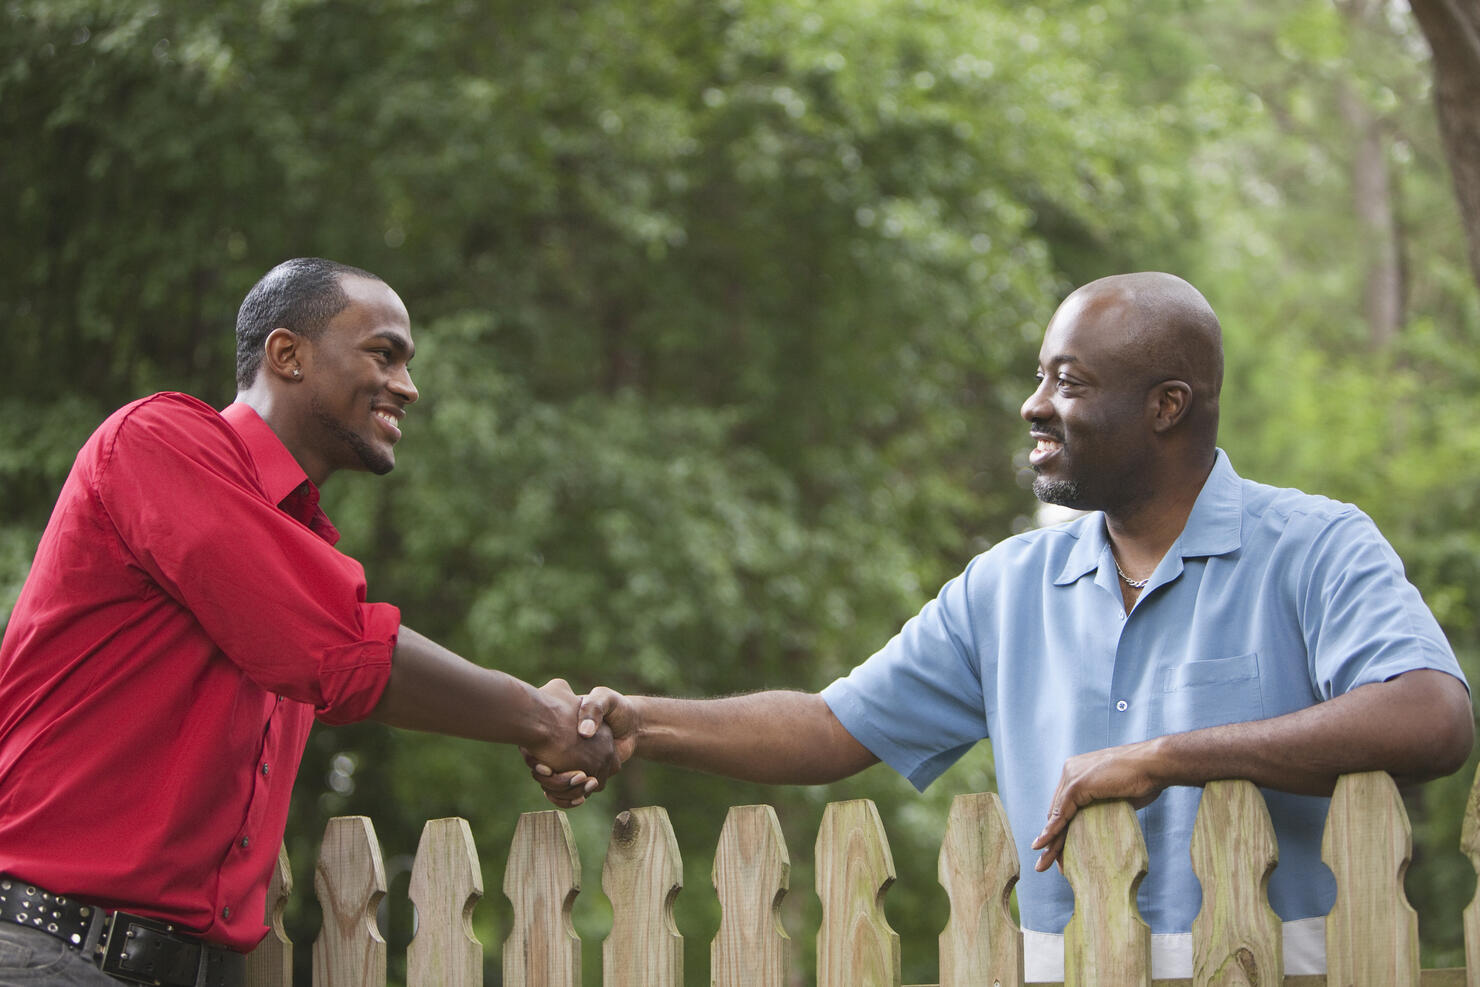 African American neighbors greeting each other over fence